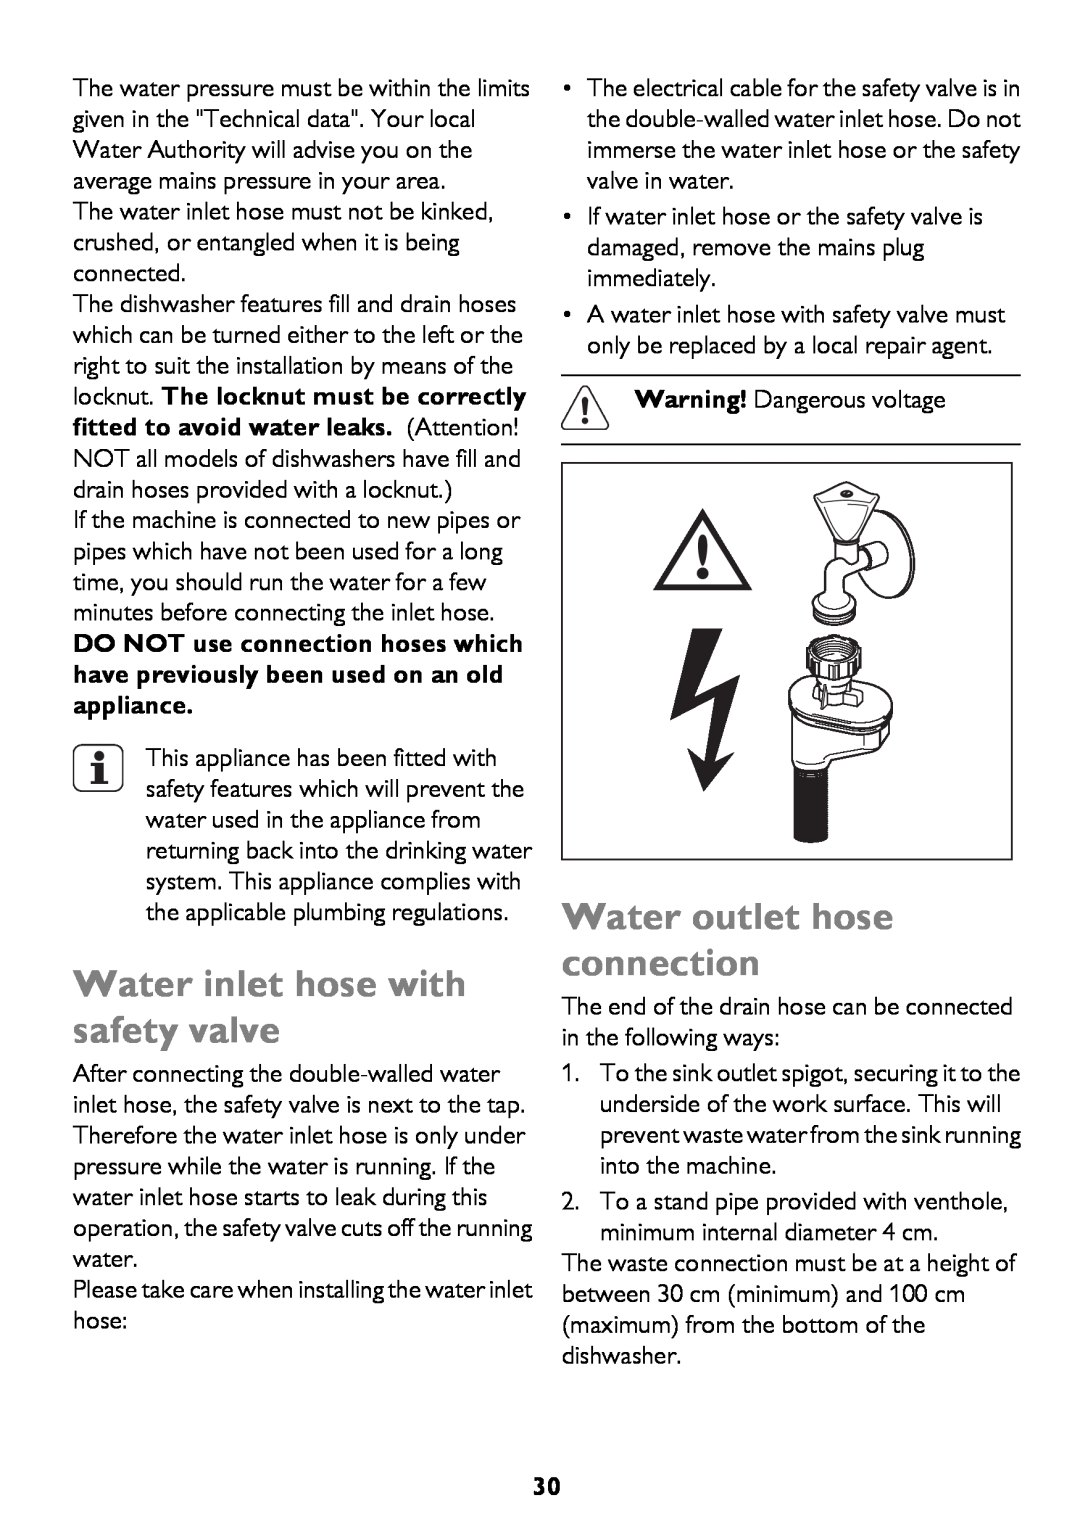 John Lewis JLDWW 906 instruction manual Water inlet hose with safety valve, Water outlet hose connection 